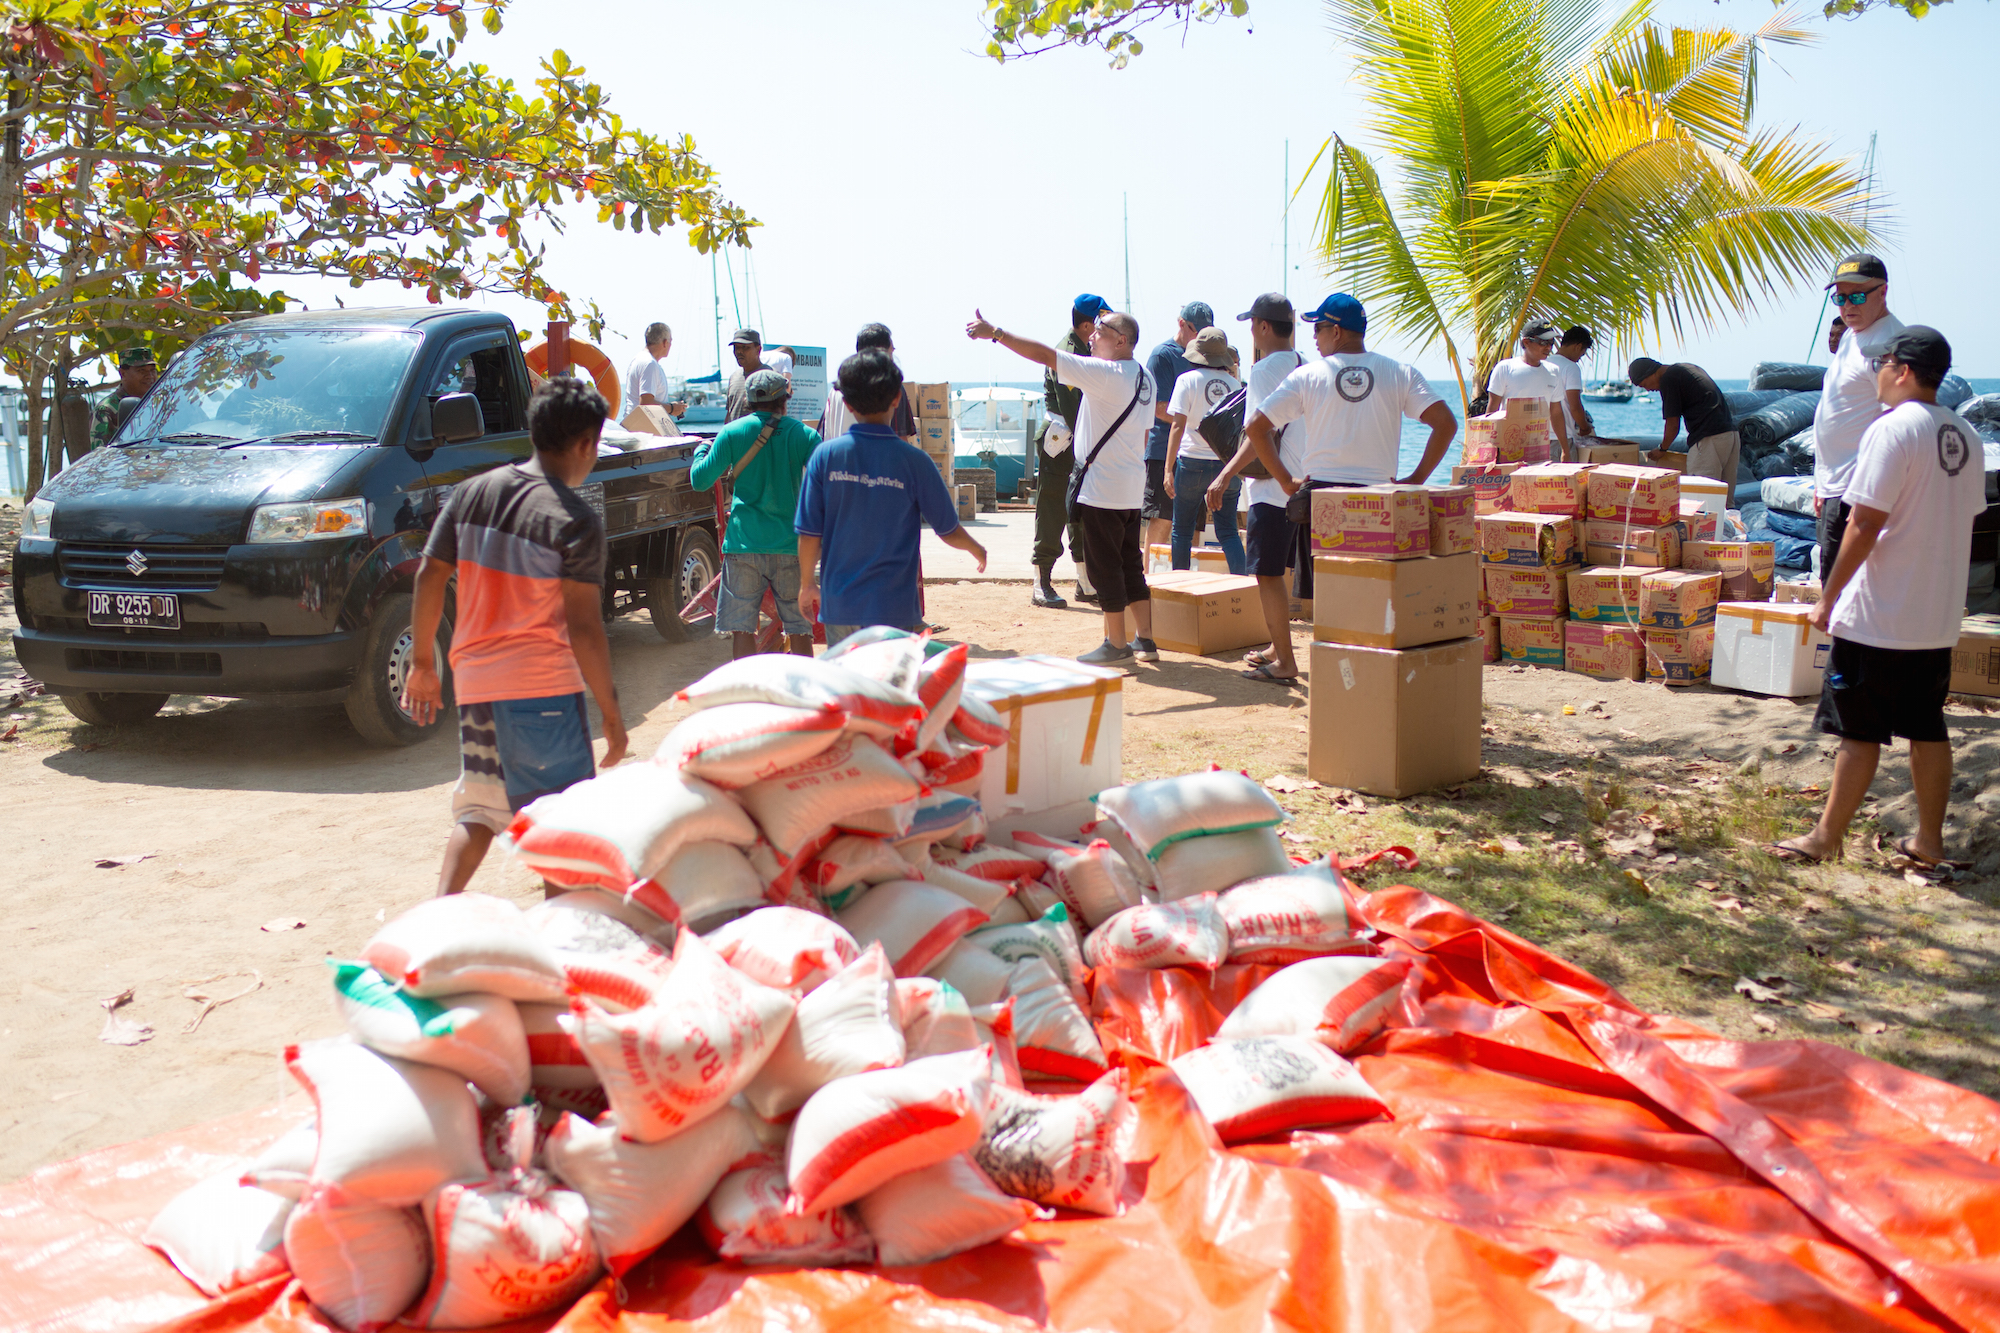 people on beach organizing donations for earthquake relief